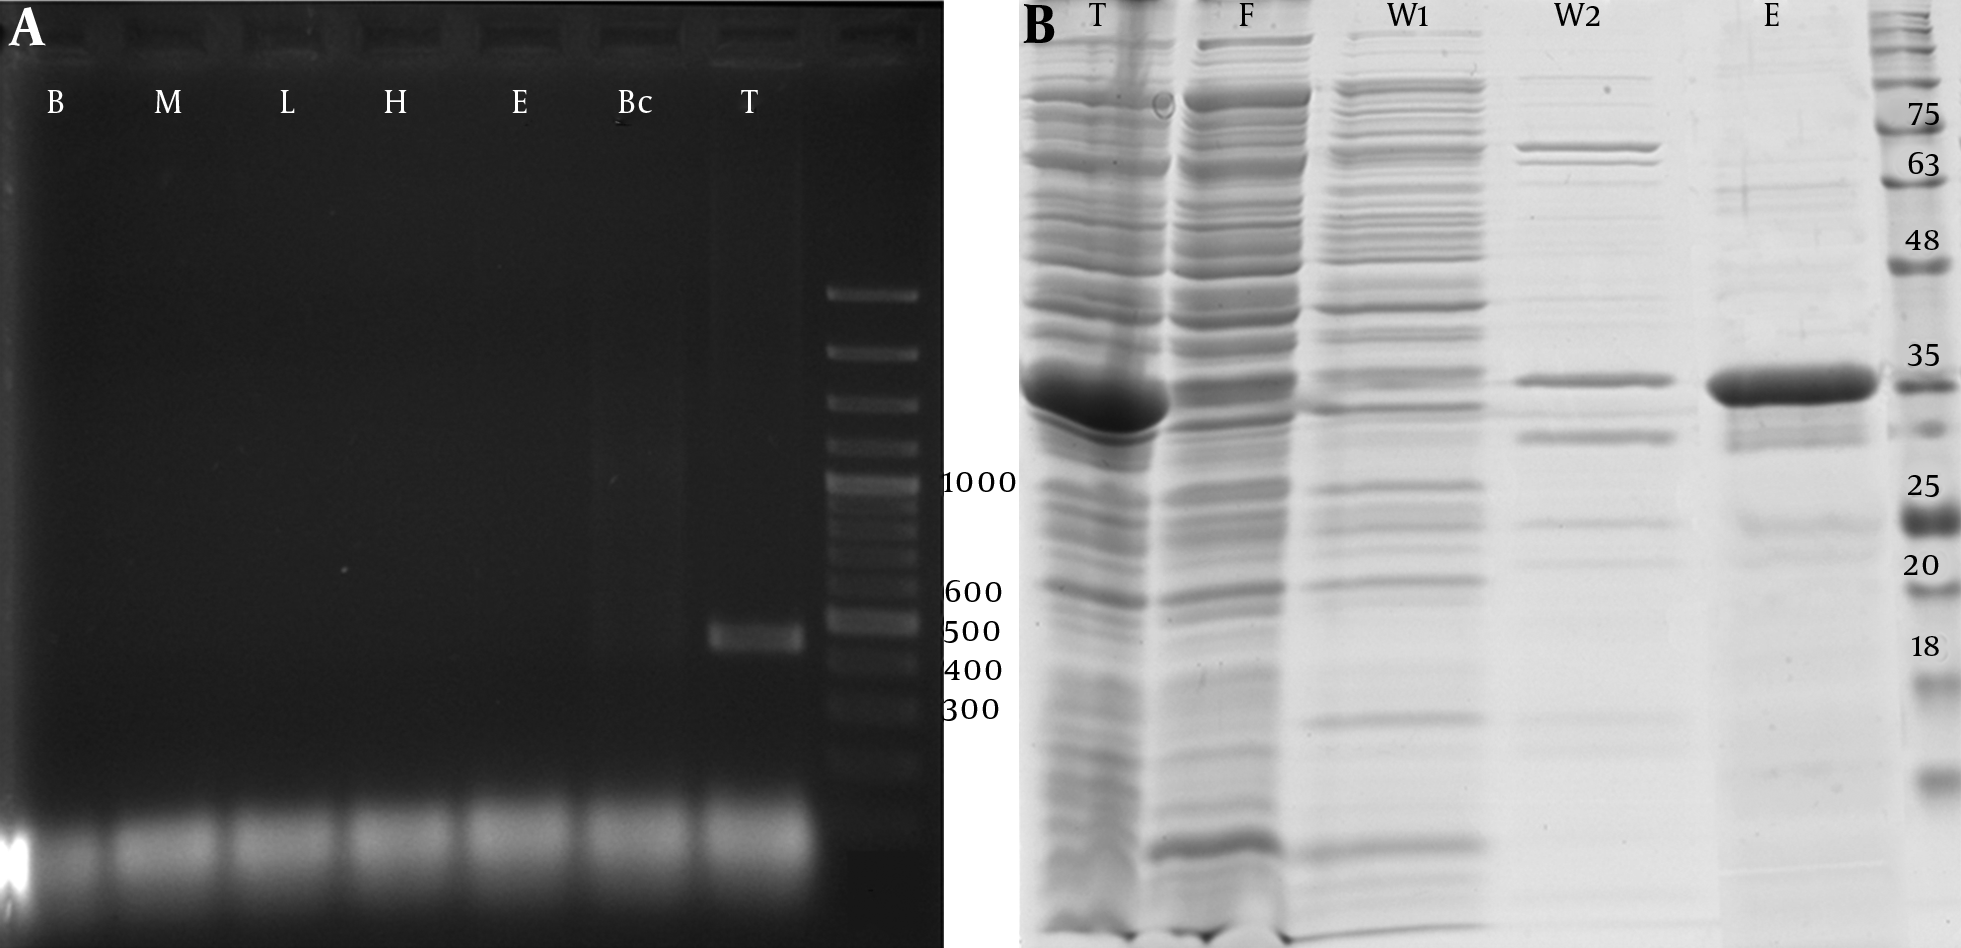 A, PCR amplification analysis of the 426 bp fragment of PTHrP ‎coding cDNA derived from human cDNA libraries of blood cells (B), bone marrow ‎derived MSCs (M), liver tissue (L), hepatocytes cells (H), embryonic stem cells ‎‎(E), breast cancer cells (Bc), and testis tissue (T), b, SDS-PAGE analysis of ‎recombinant PTHrP expressed by pET 32a transformed Rosetta™ 2 competent ‎cells at 37°C for 6 hours. Total soluble cell expressed proteins (T) were purified by ‎‎6xHis/Ni-NTA system, washed with 20 (W1) and 50 (W2) mM wash buffers and ‎eluted (E) using 300 mM elution buffer. F: Flow-through fraction of Ni-NTA resin ‎loaded soluble protein.